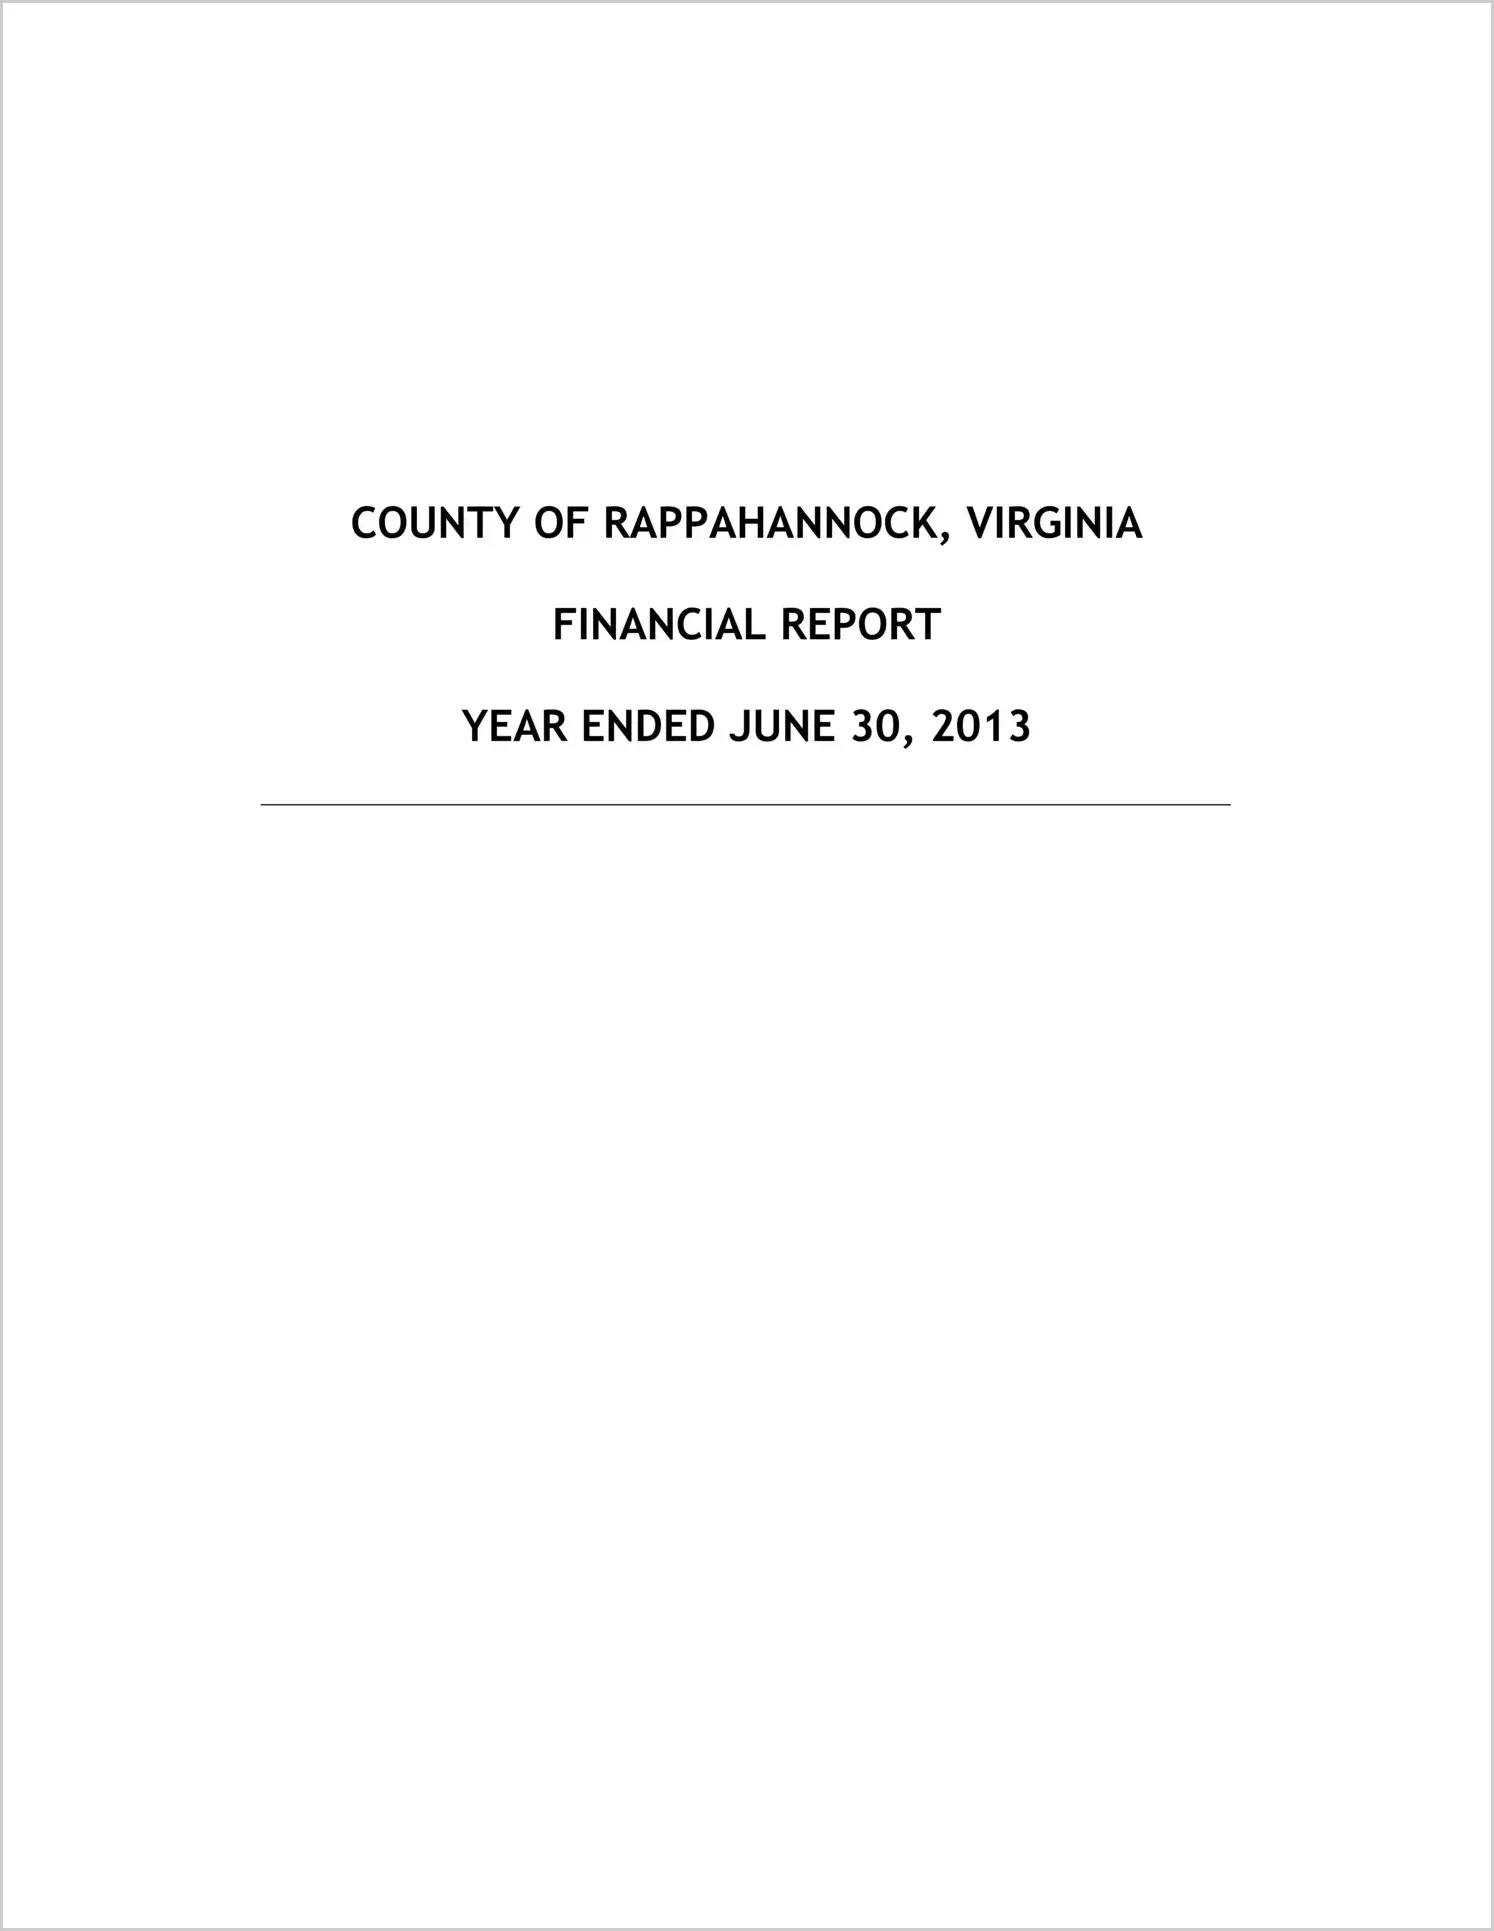 2013 Annual Financial Report for County of Rappahannock